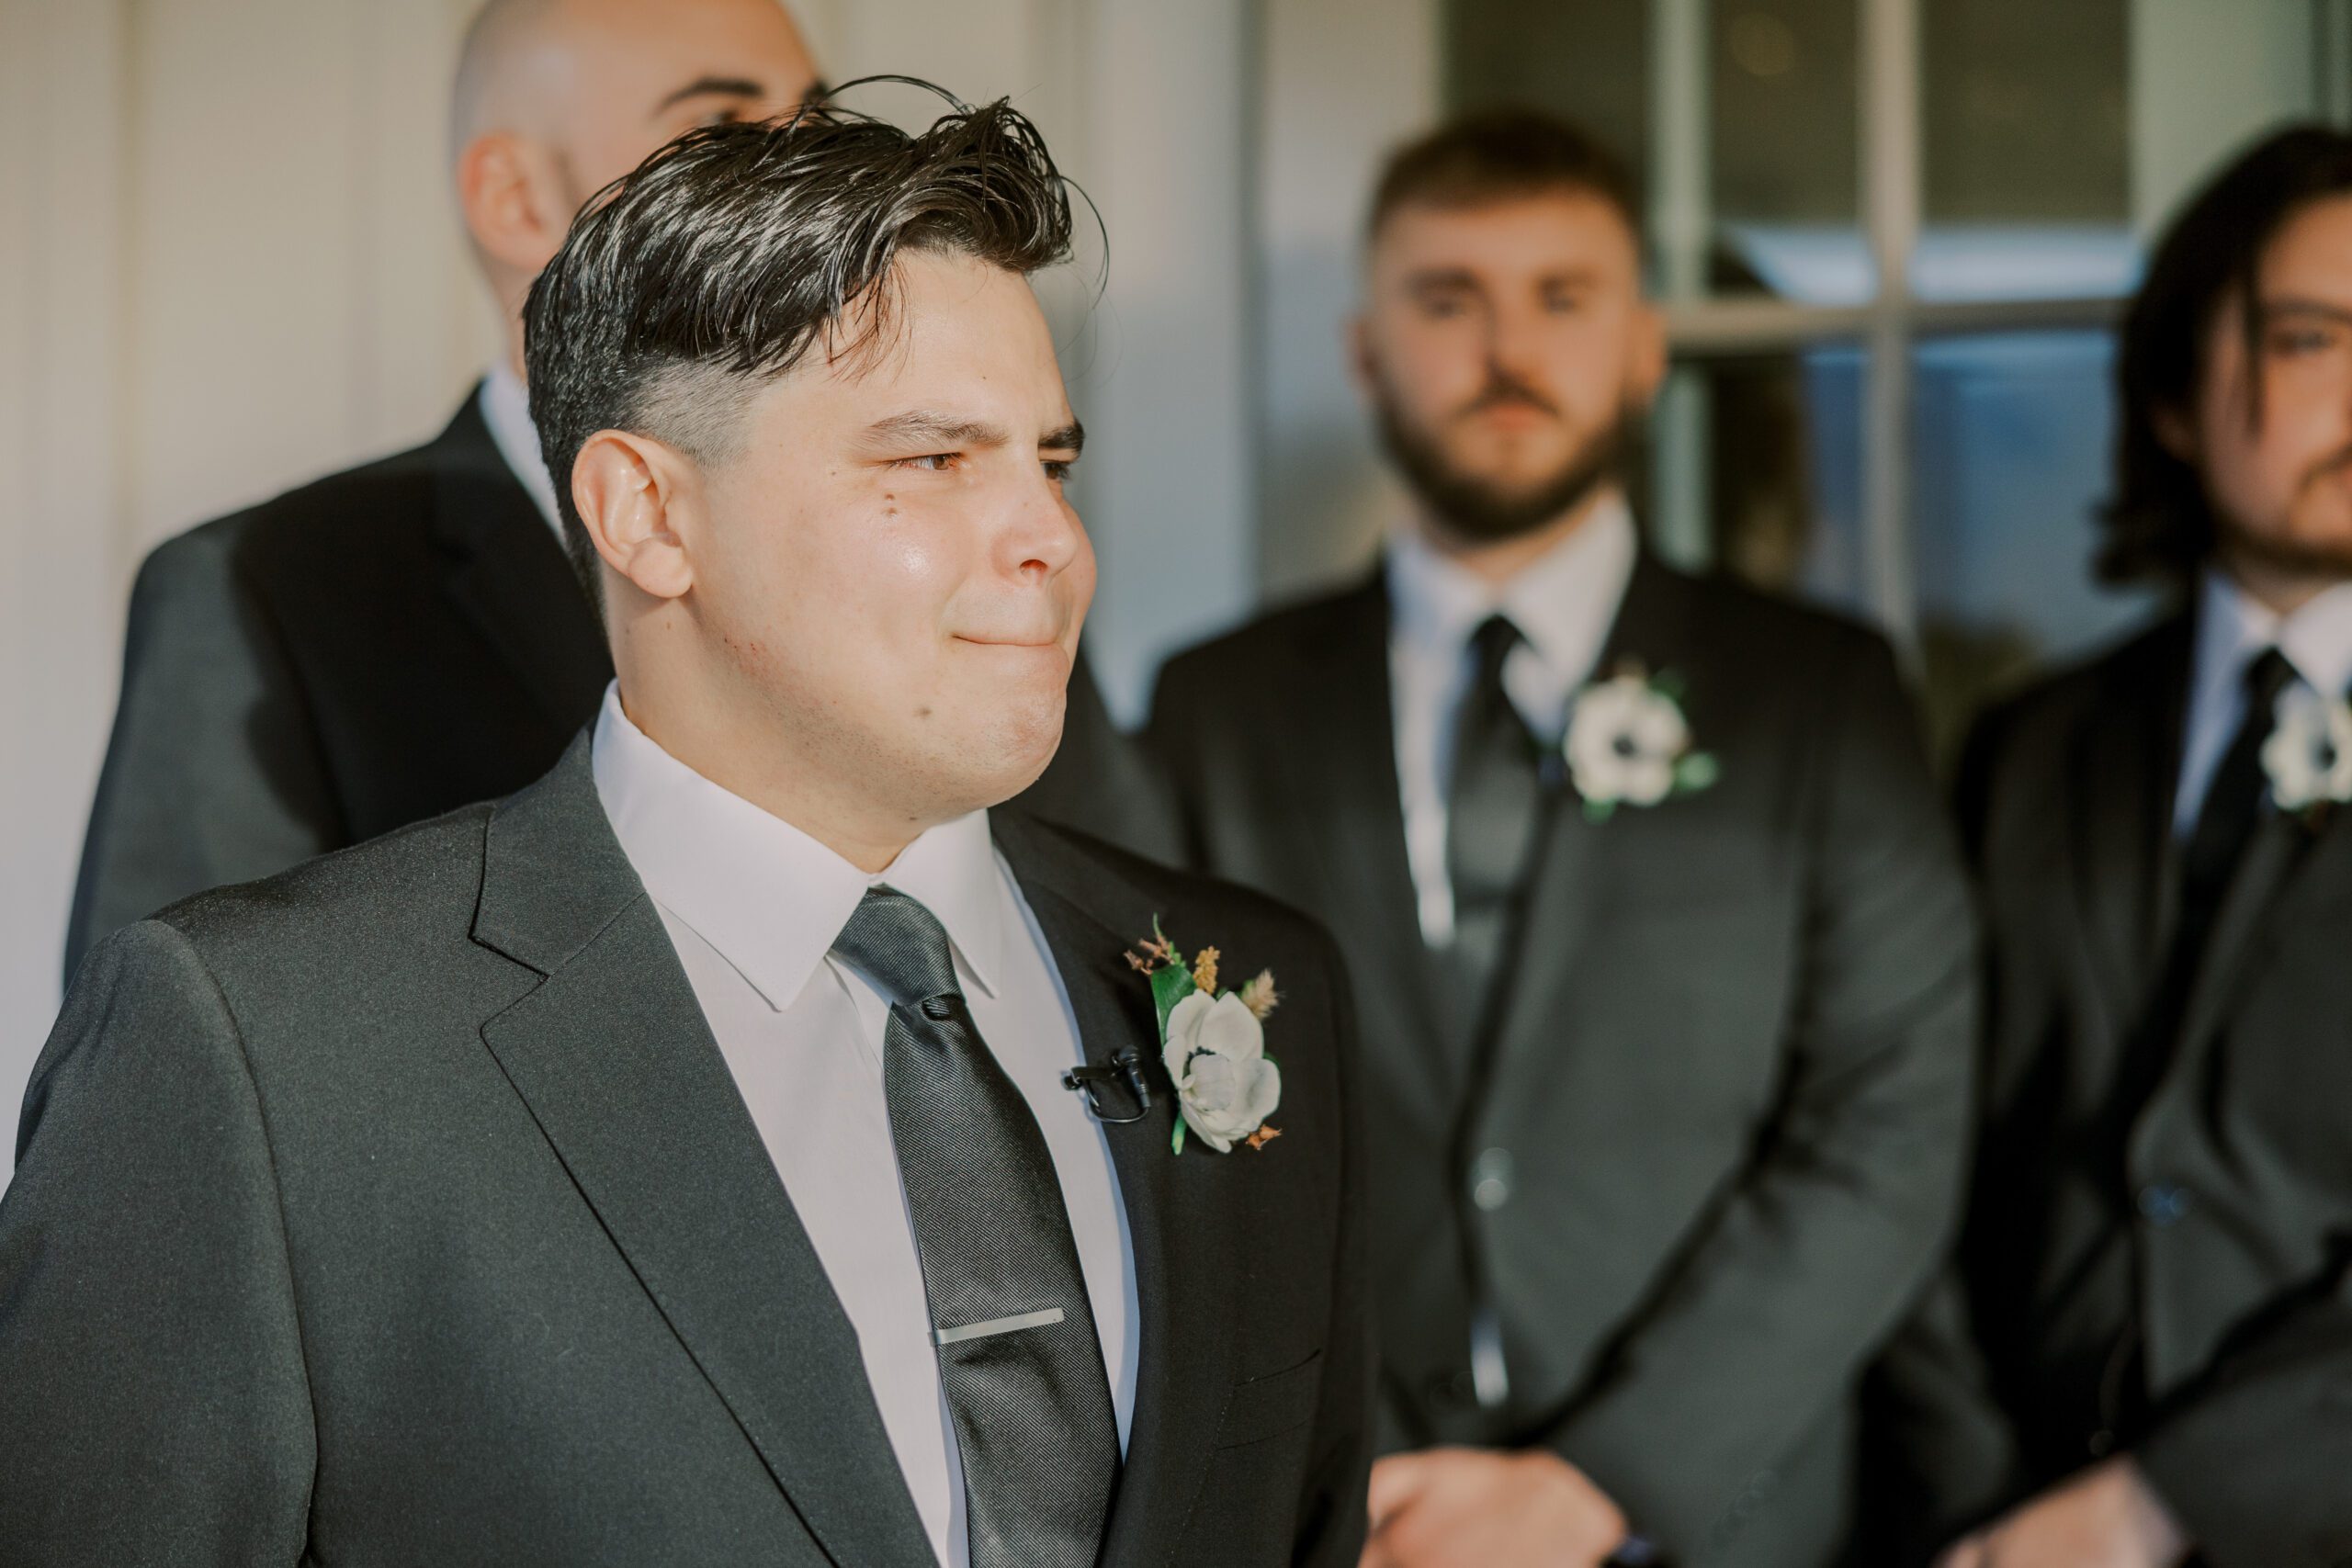 Emotional photo of groom looking up the aisle, his groomsmen pictured in the background